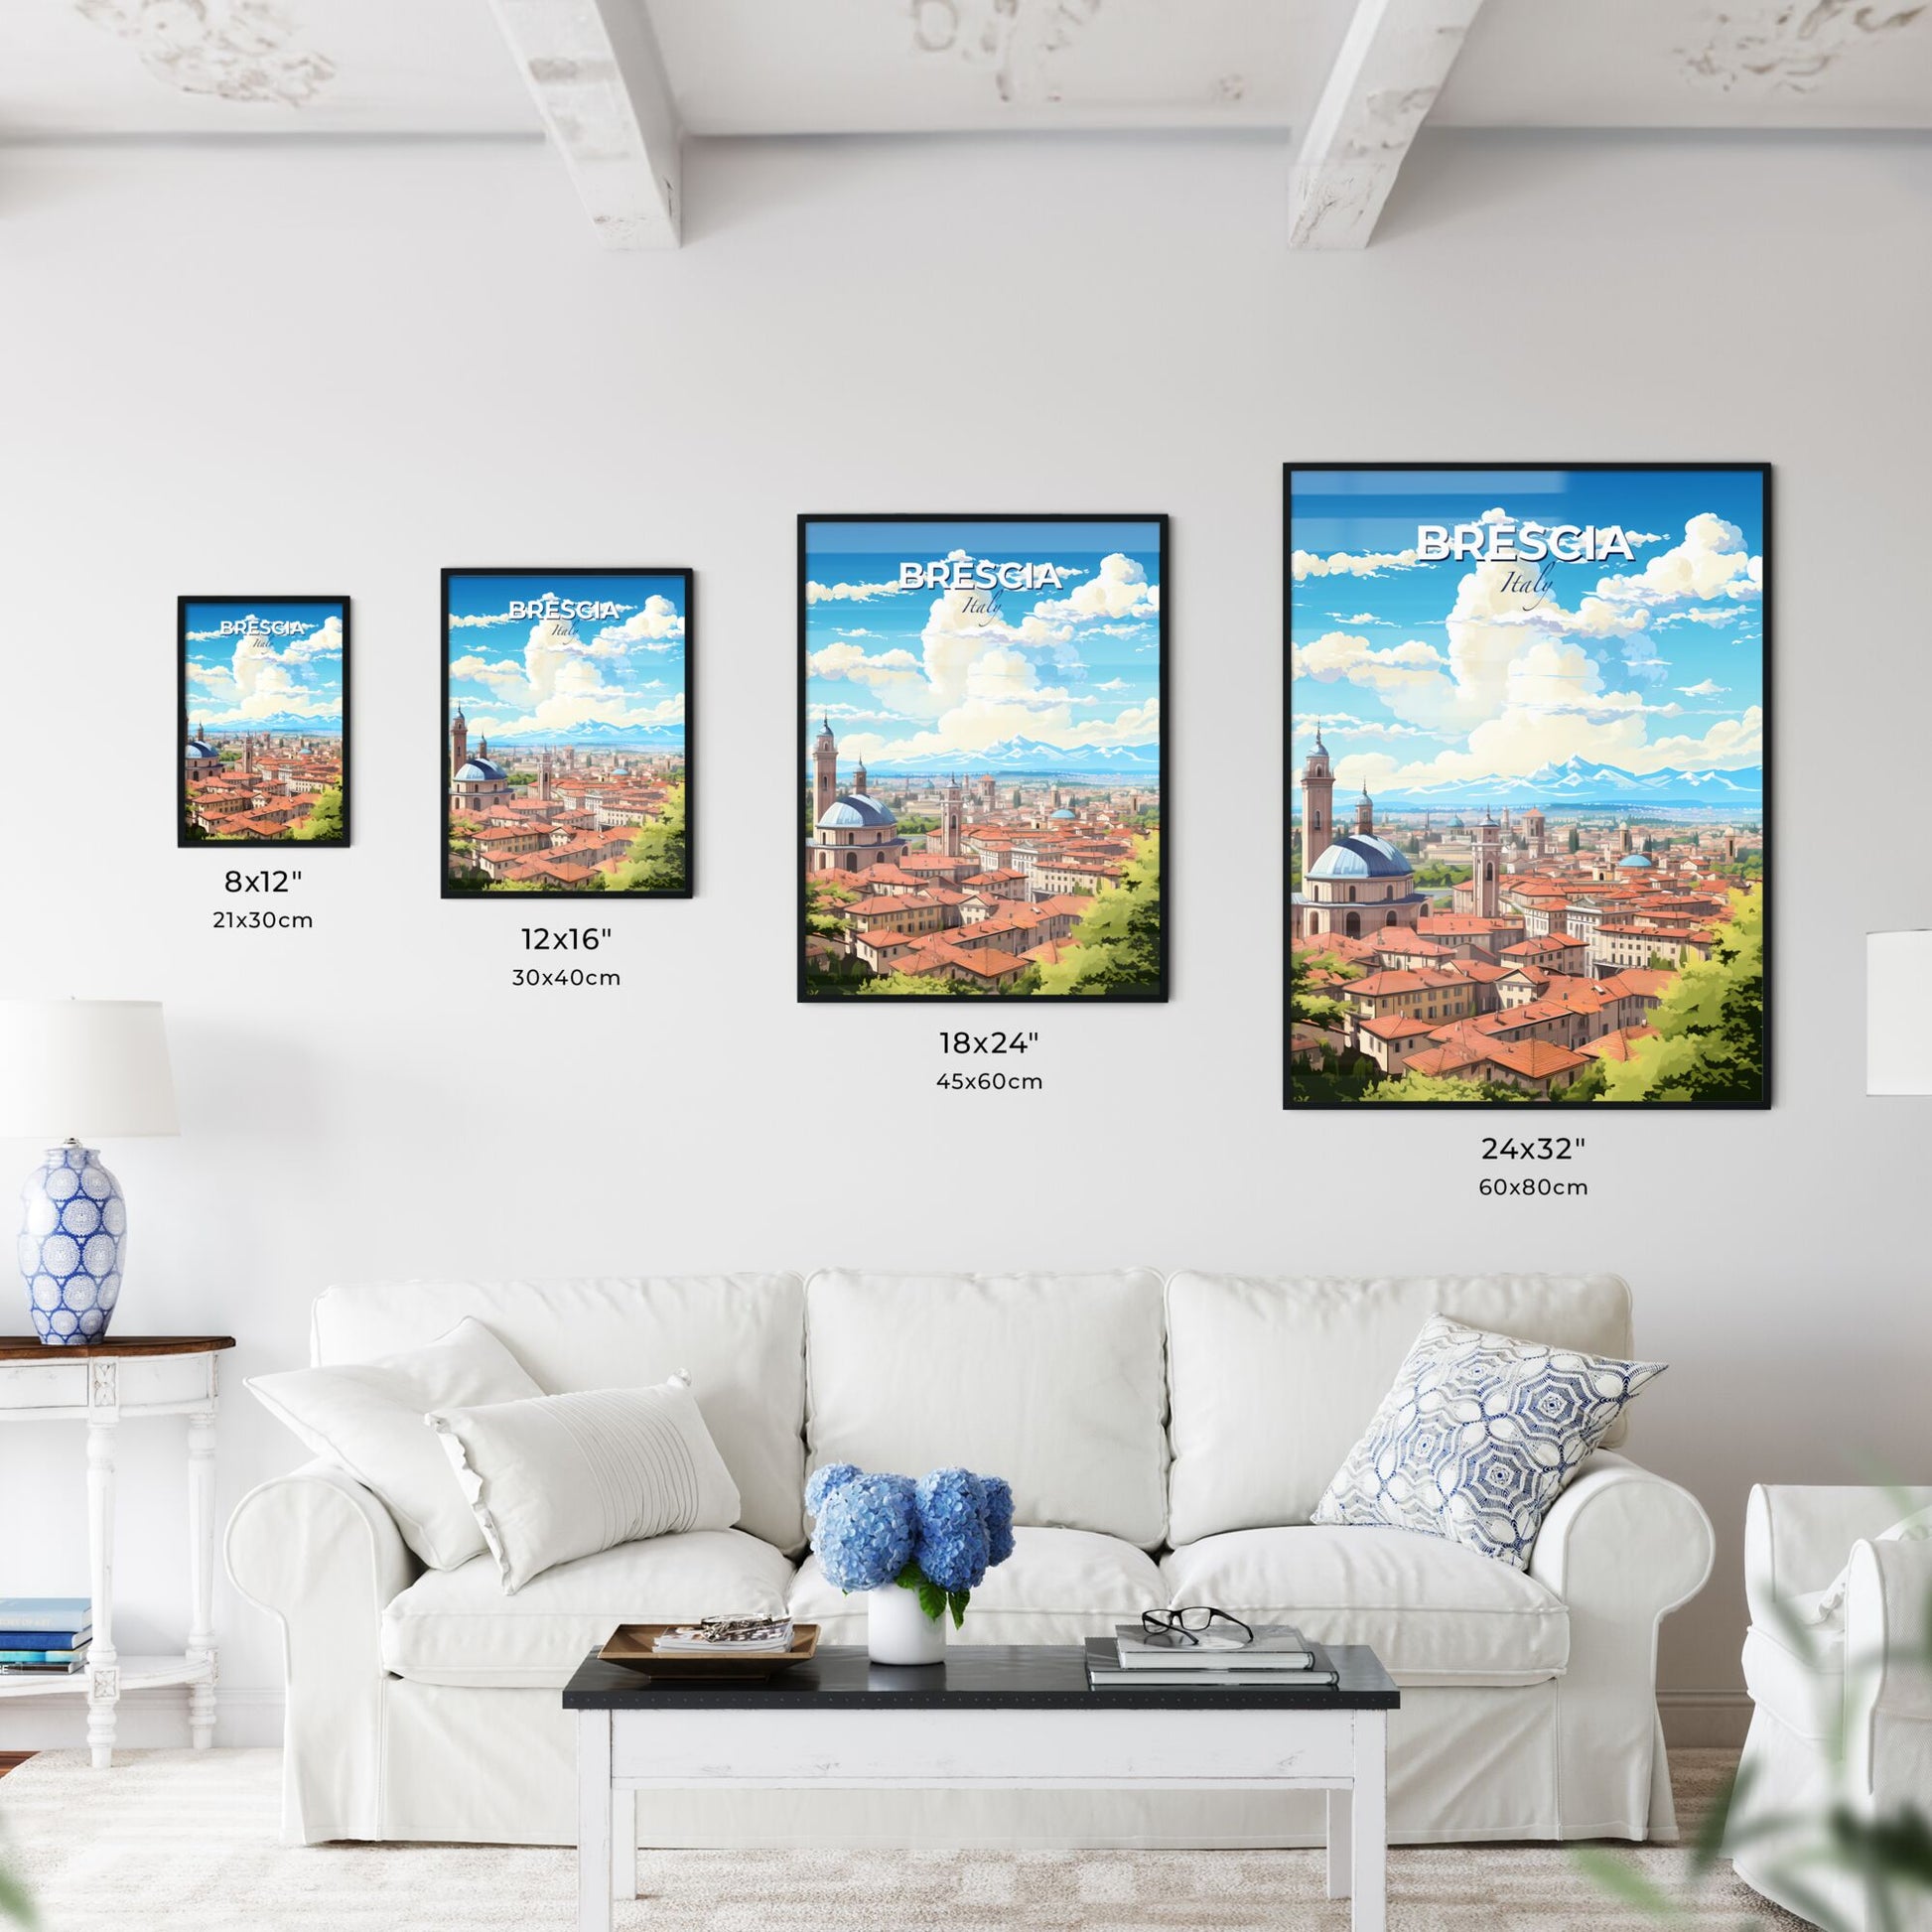 Brescia Italy Skyline - A City With Many Buildings And Trees - Customizable Travel Gift Default Title